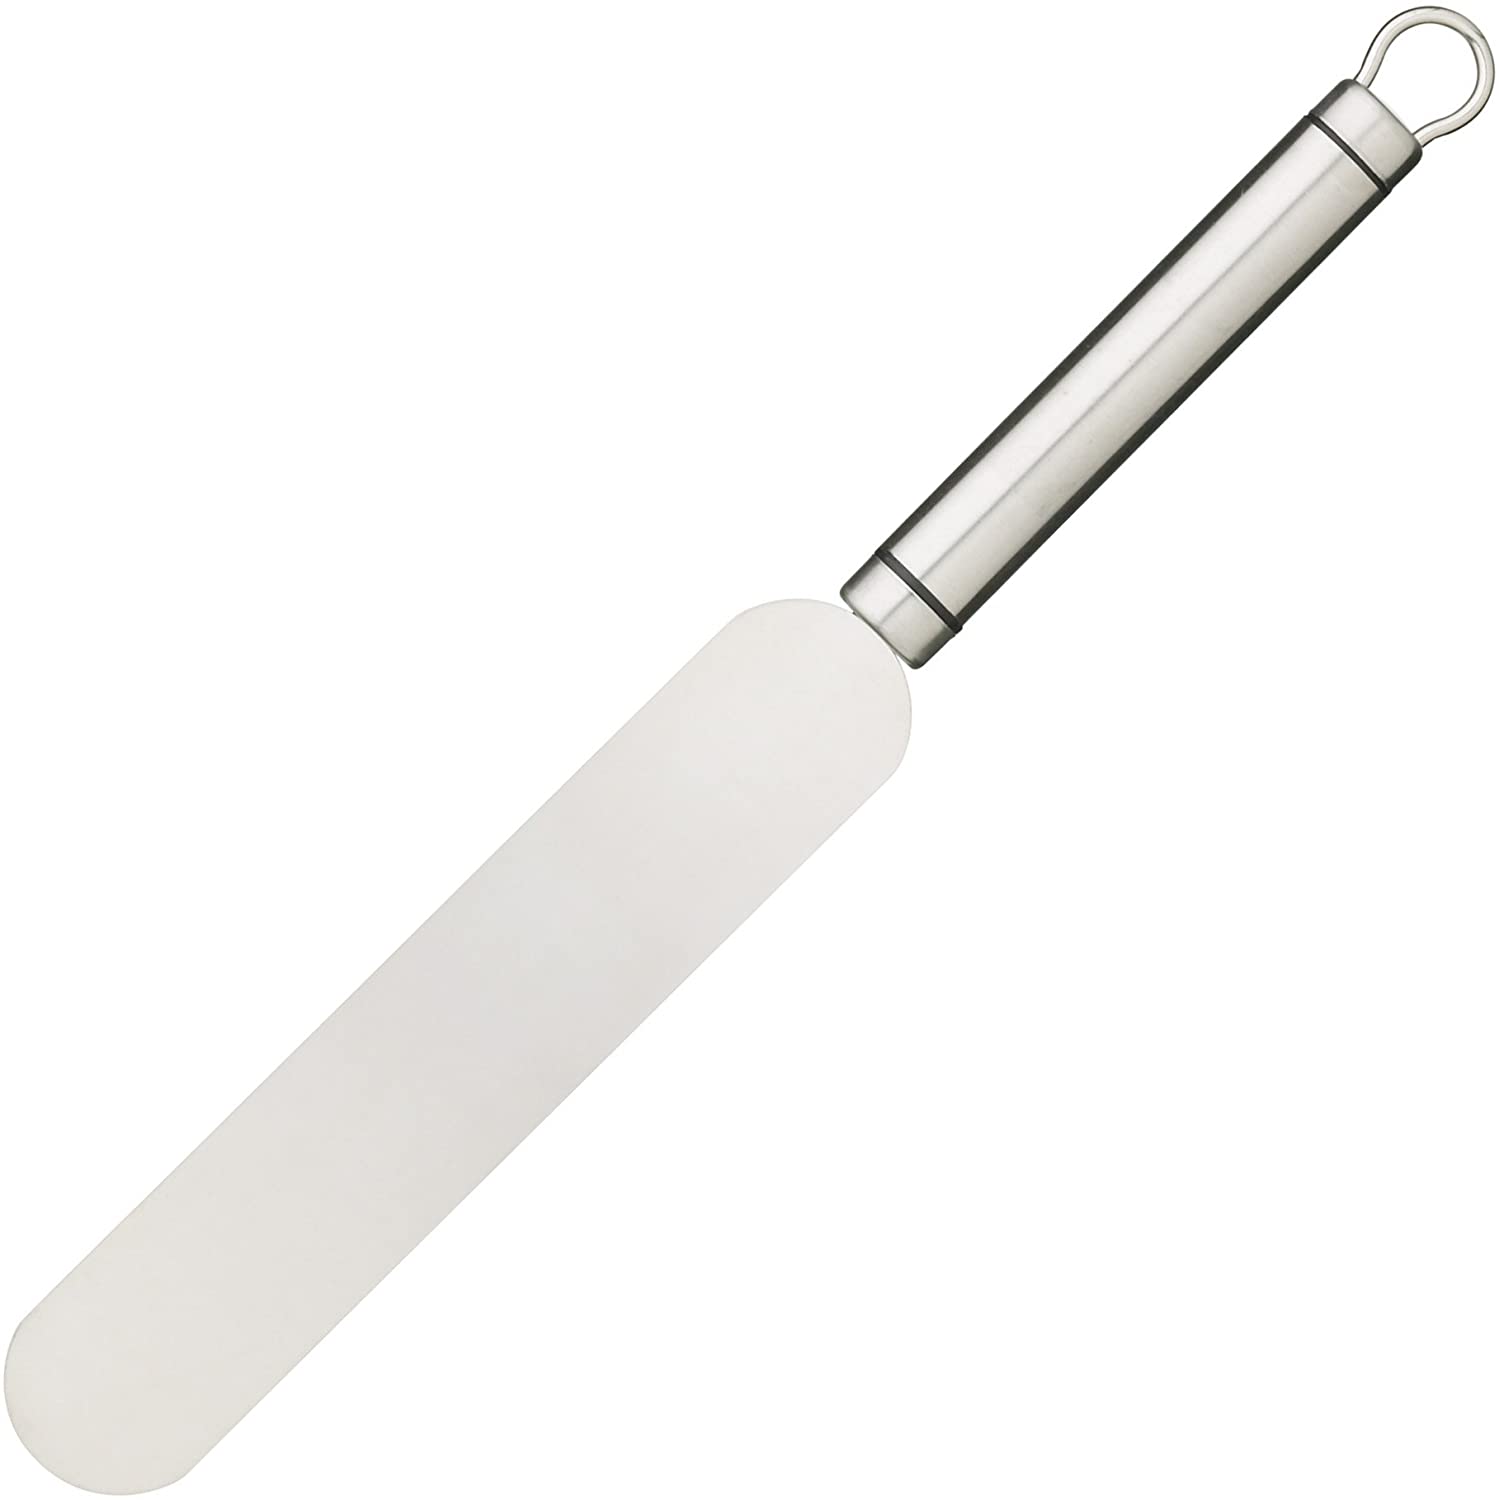 KitchenCraft Kitchen Craft Professional Stainless Steel Long Oval Handled Spatula